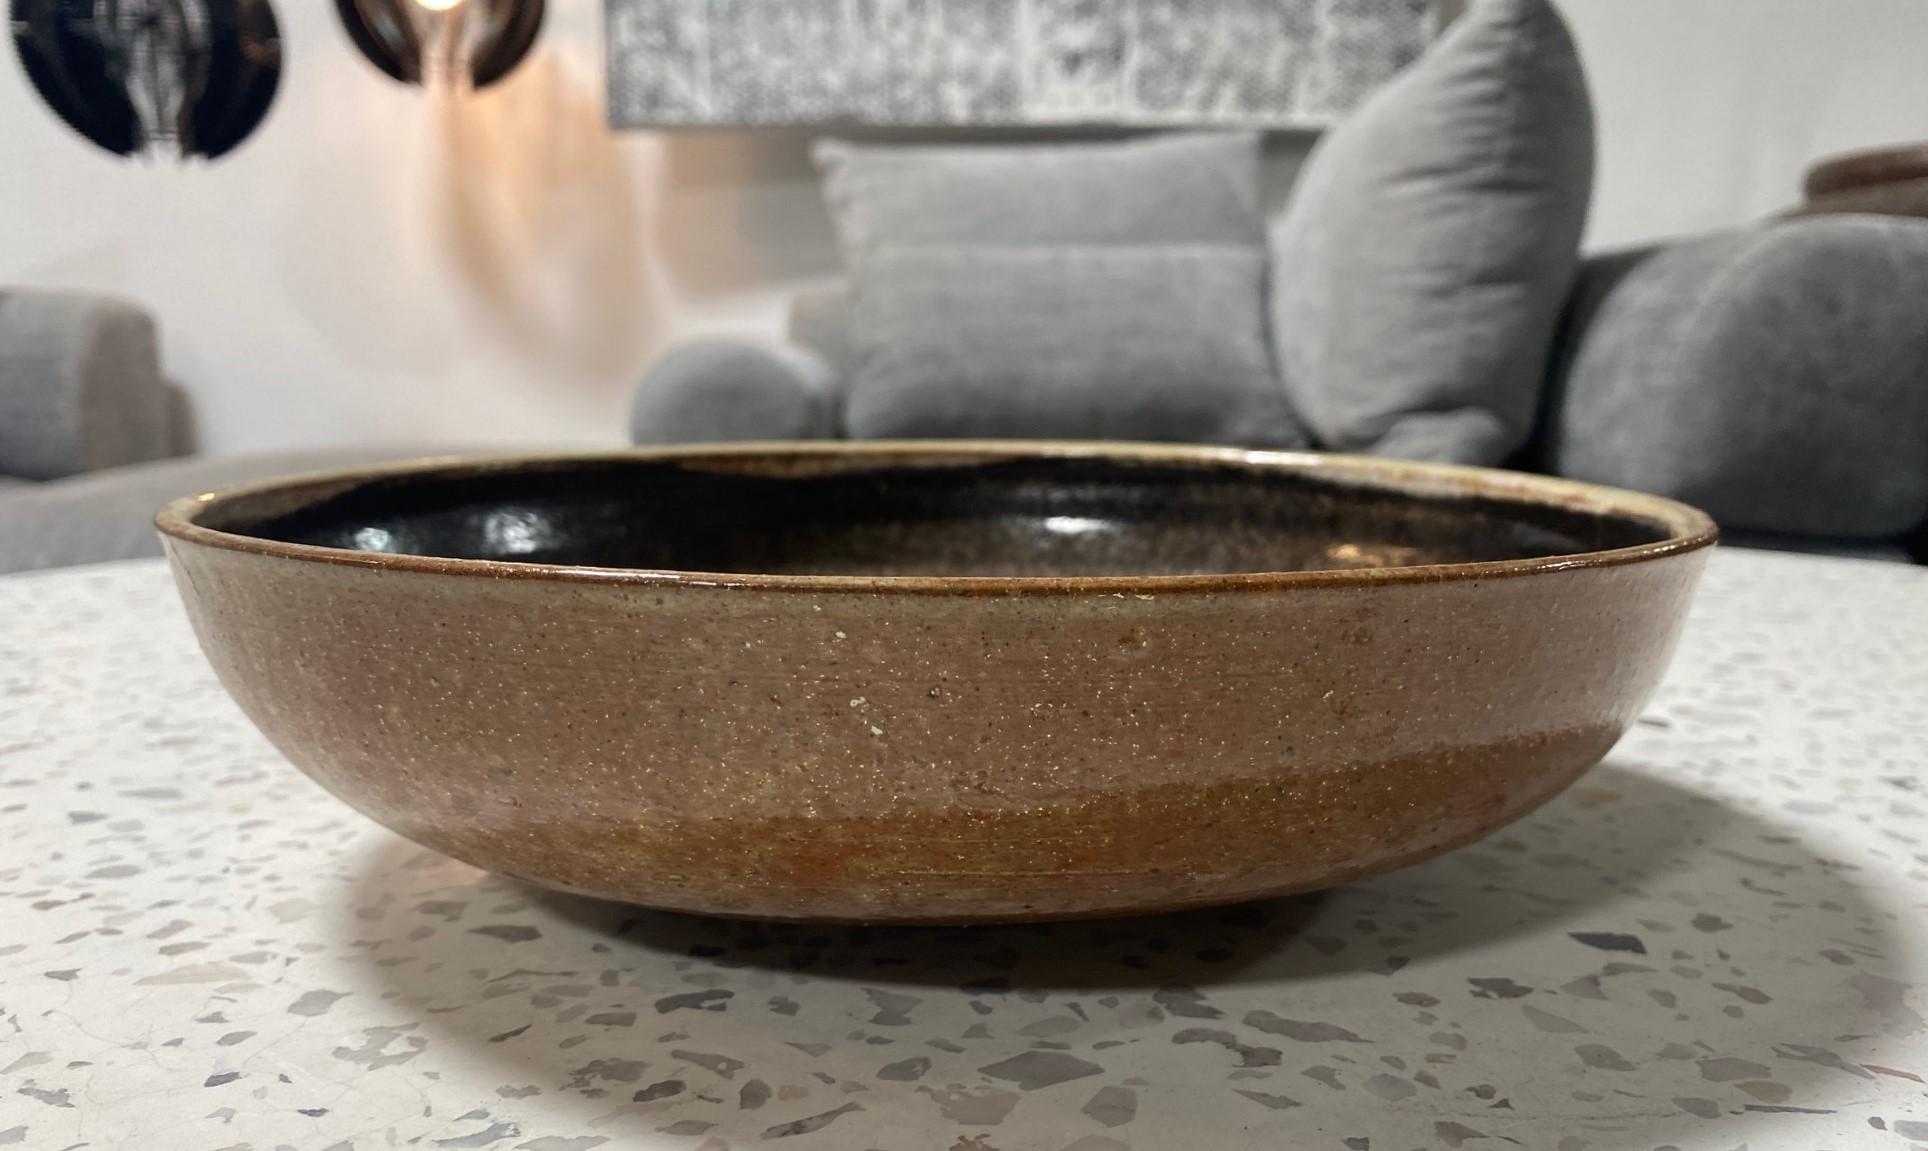 Marguerite Wildenhain Signed Pond Farm Mid-Century Modern Studio Pottery Bowl In Good Condition For Sale In Studio City, CA